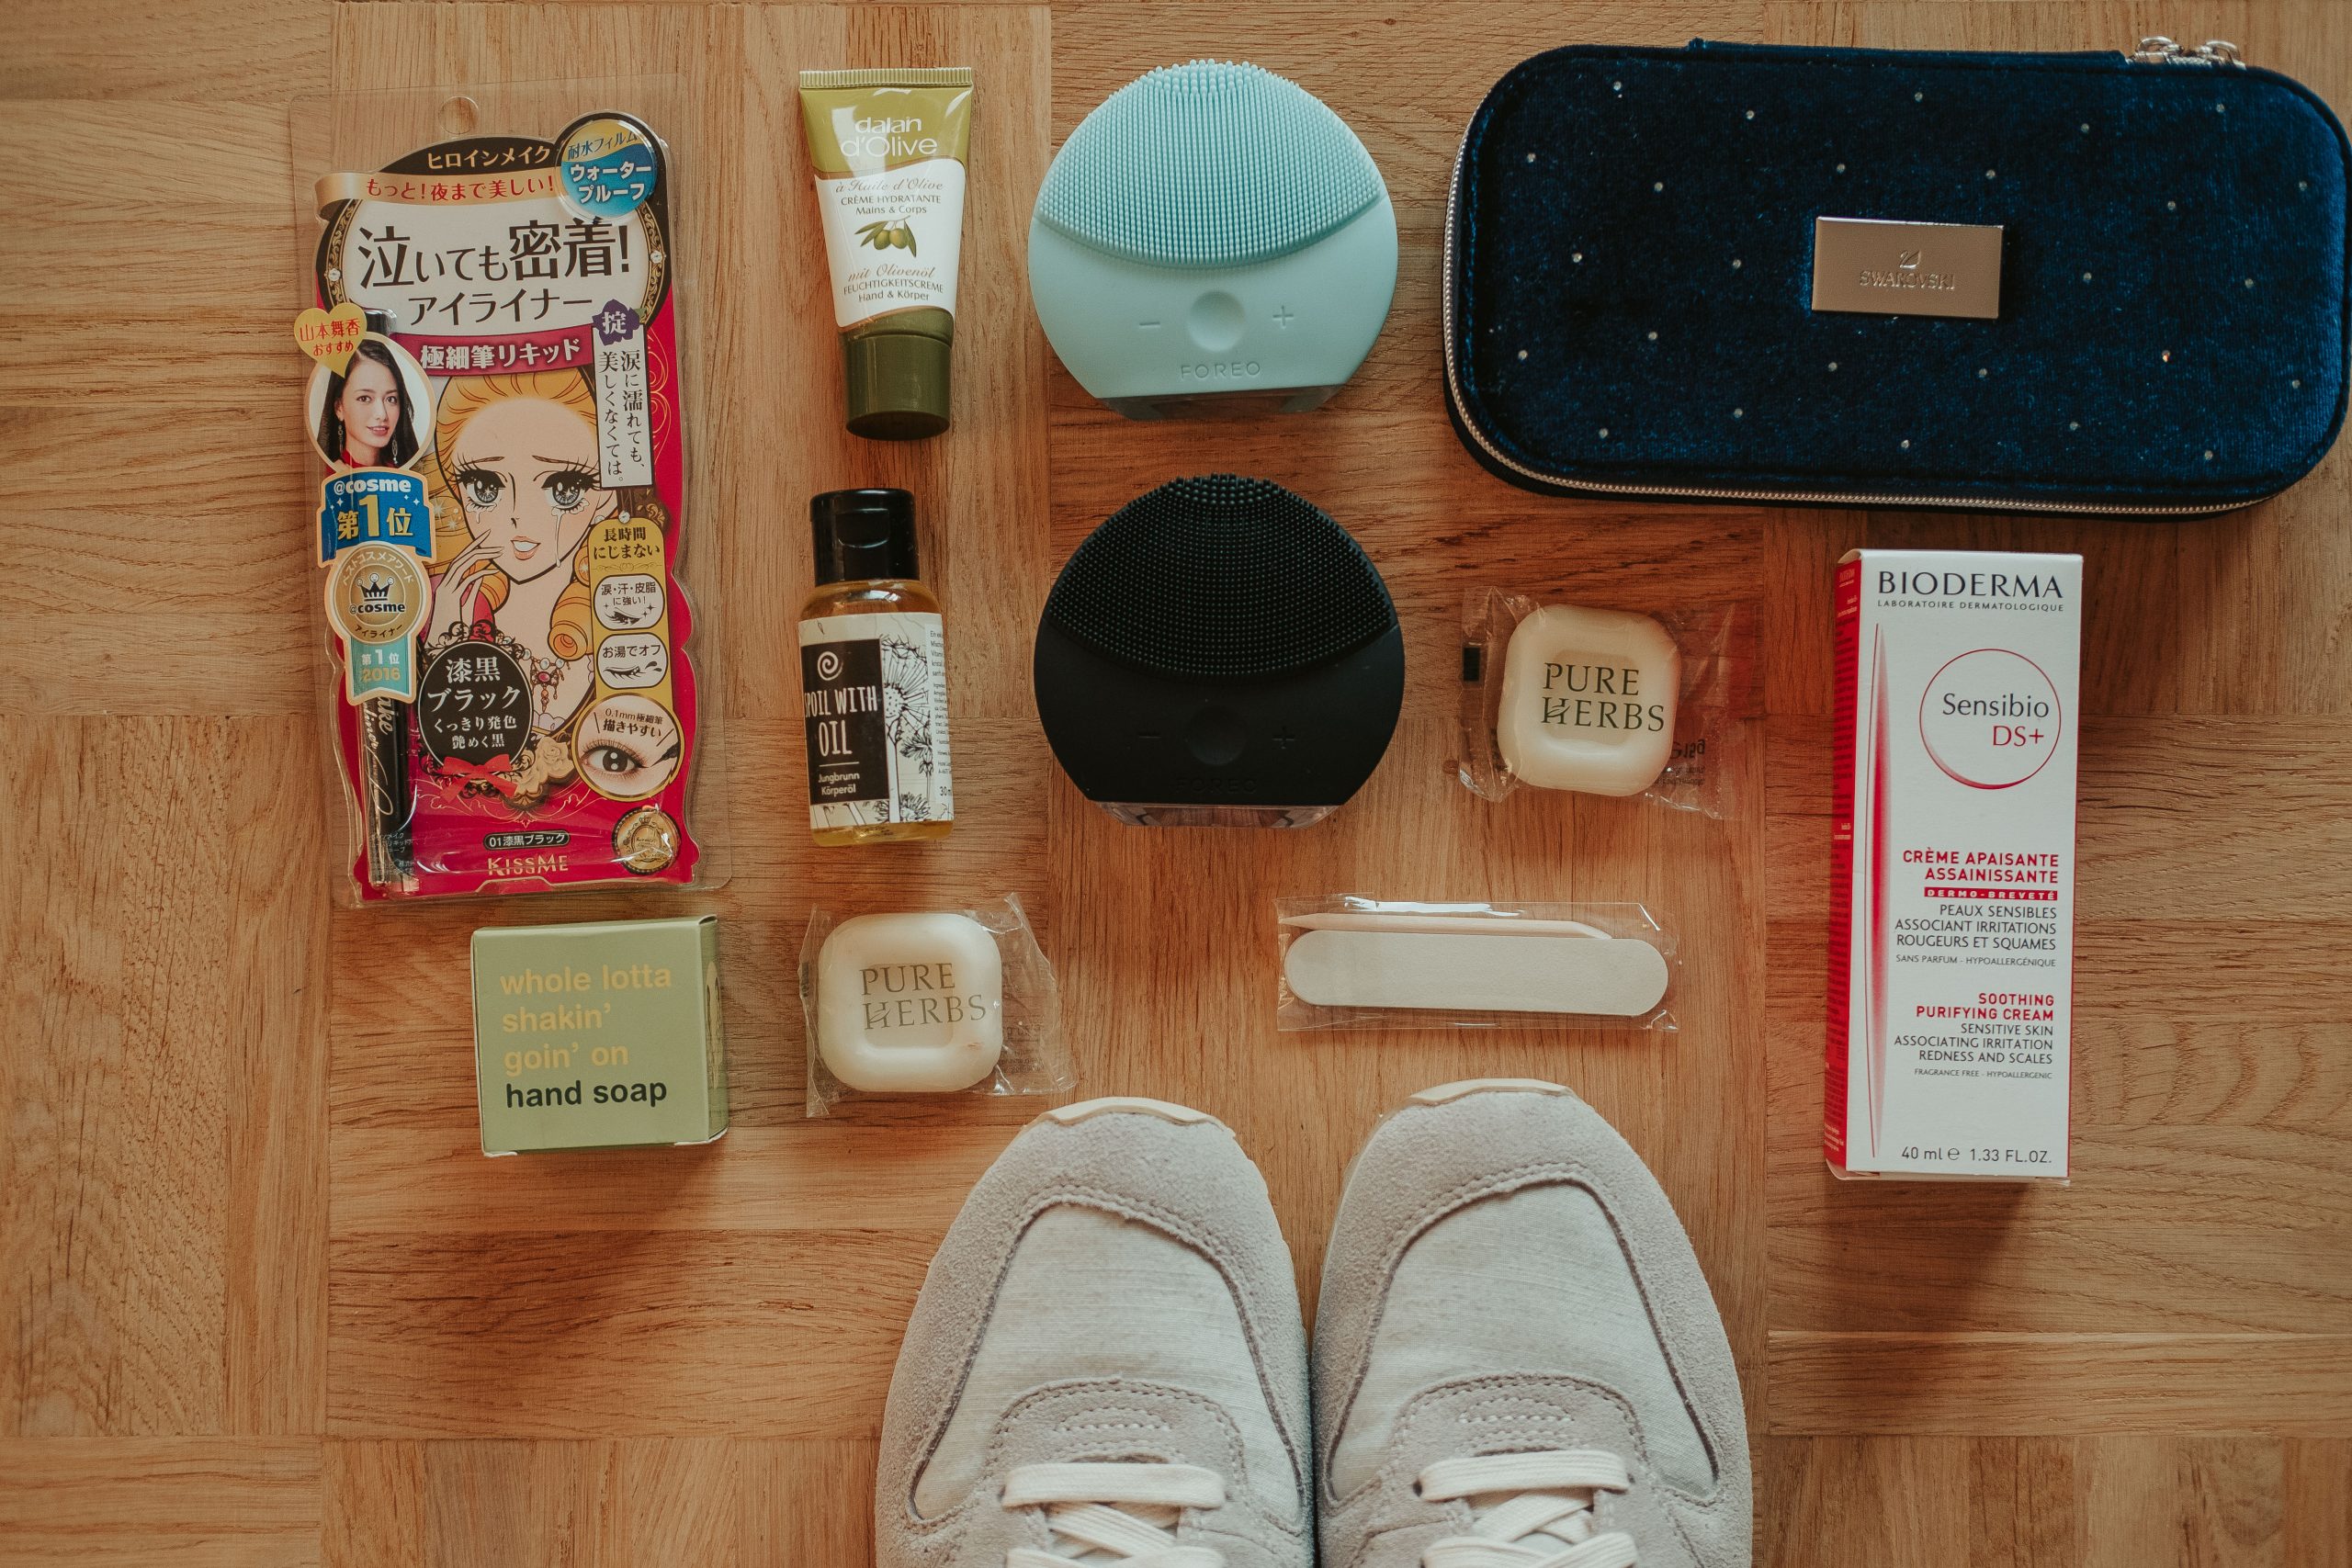 Travel essentials before packing them in our luggage